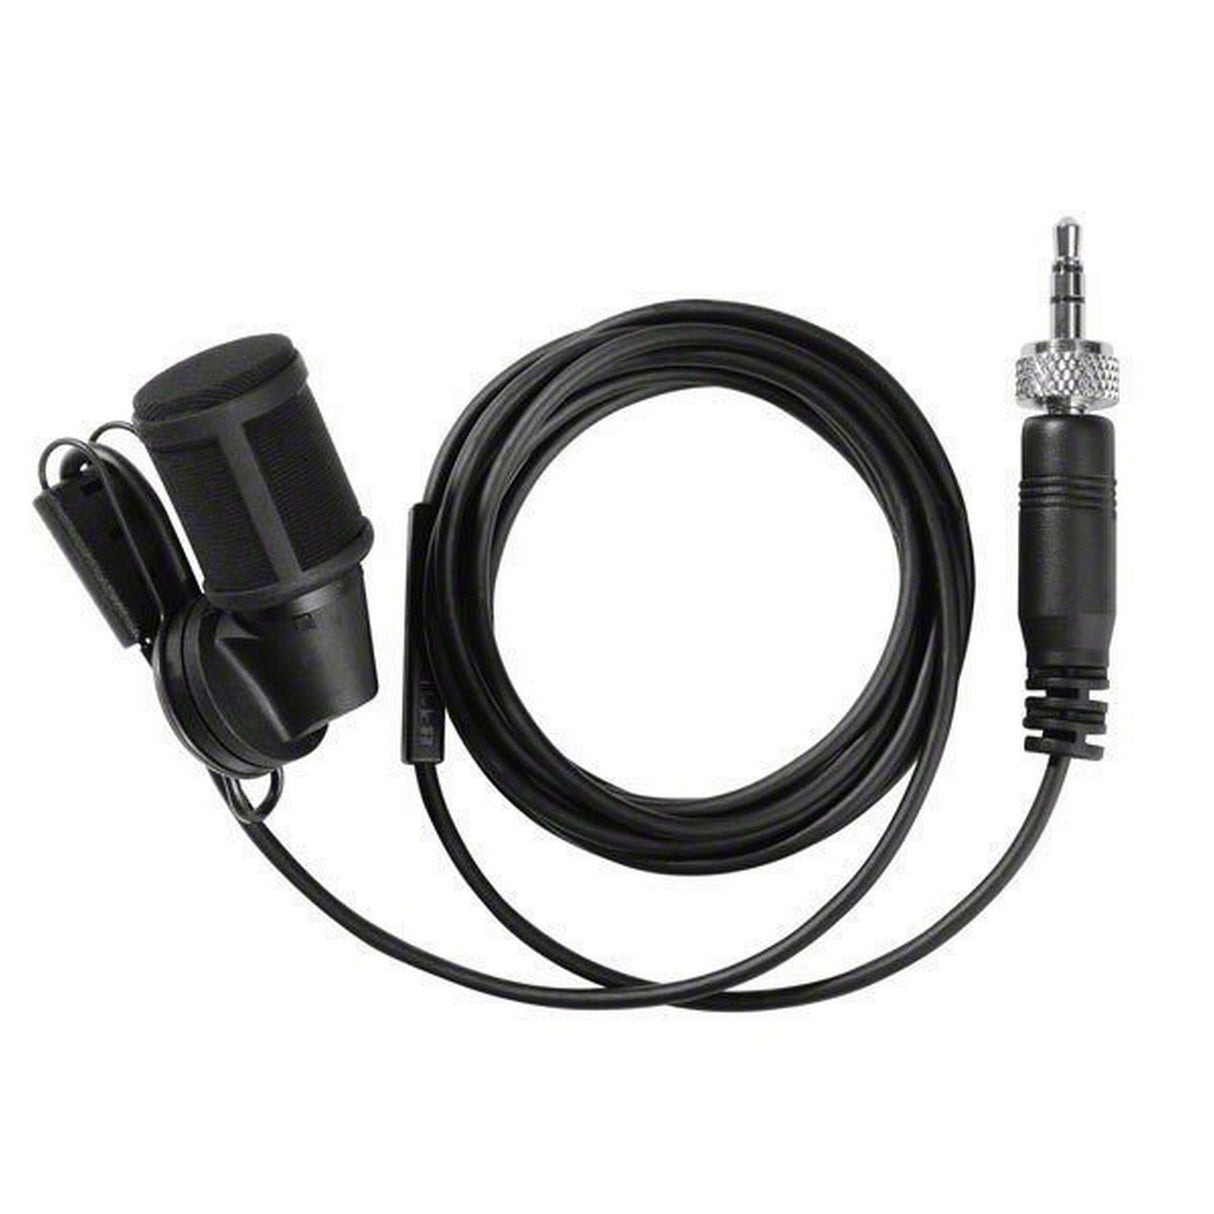 Sennheiser MKE 40-ew Clip-On Microphone with Cardioid Pattern and TRS Connector